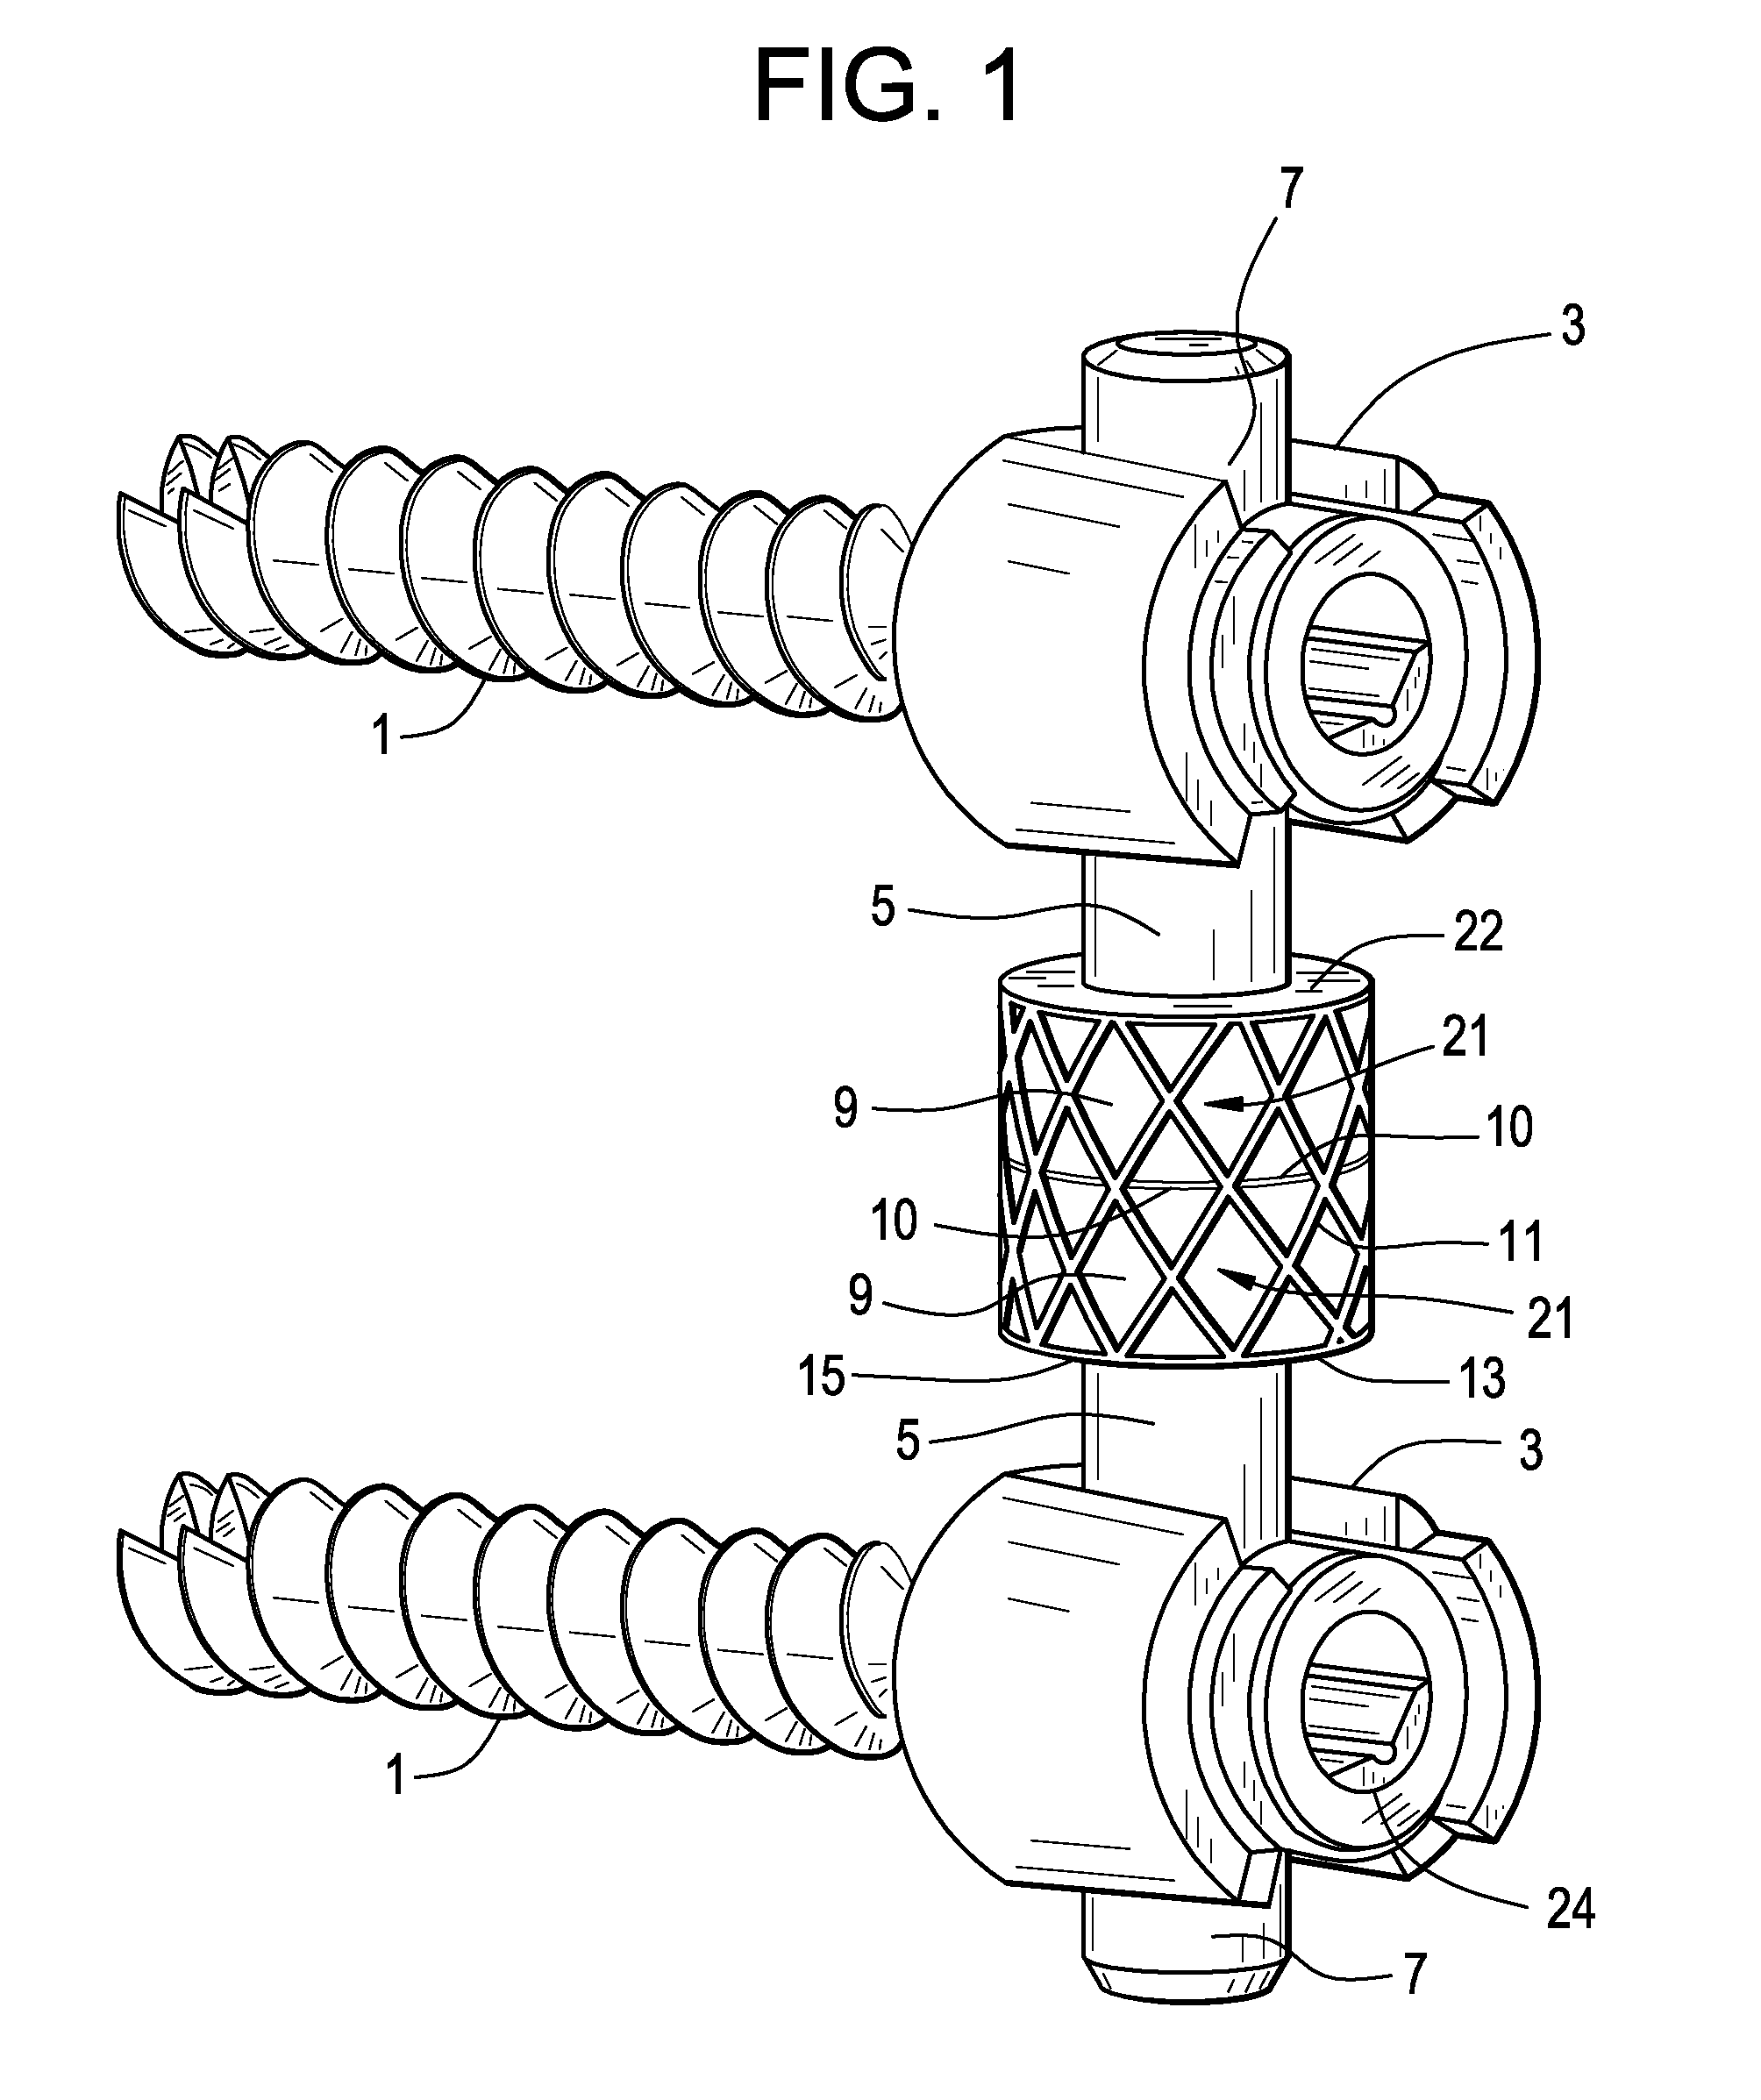 Posterior Dynamic Stabilization System With Flexible Ligament